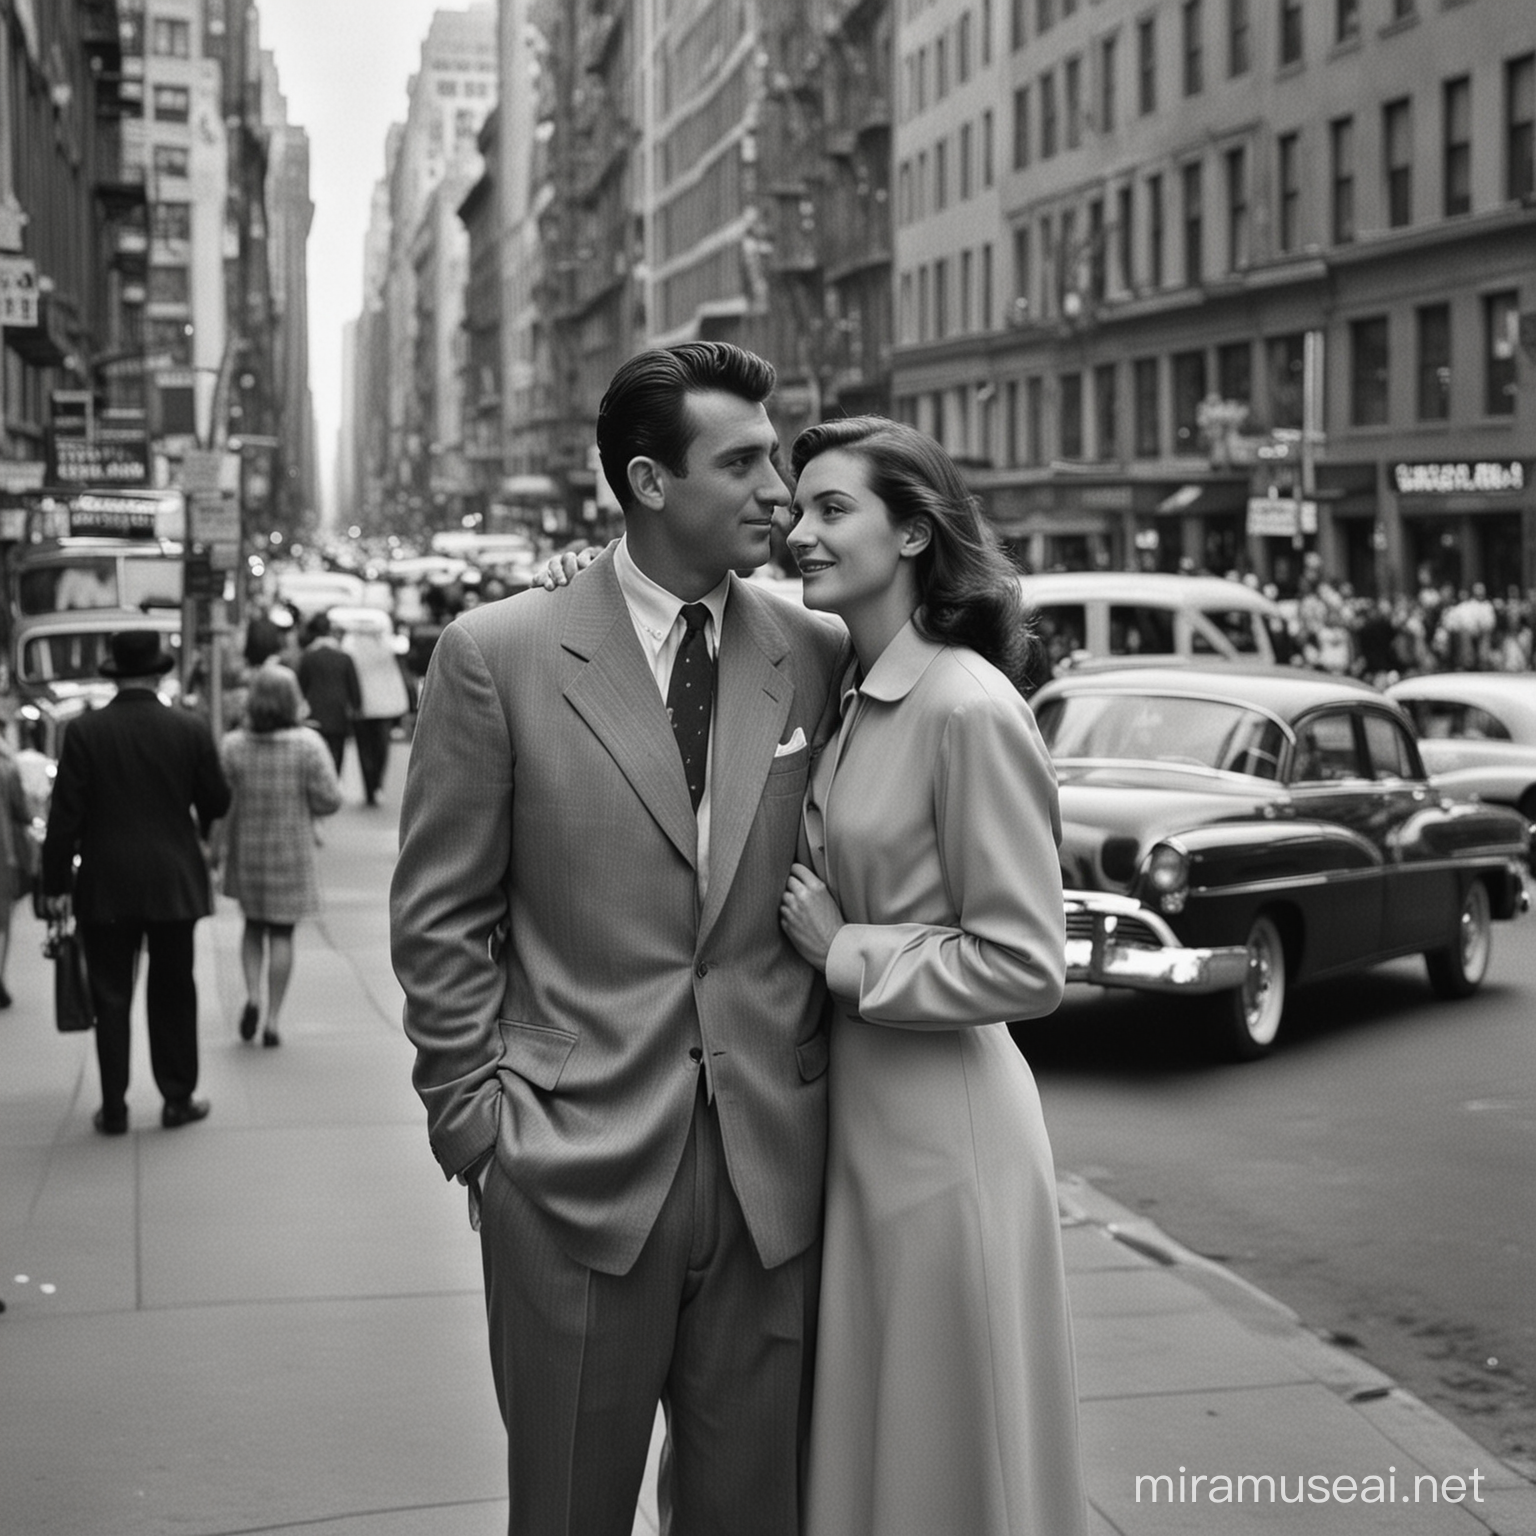  A photo of a beautiful couple in the city by Ansel Adams